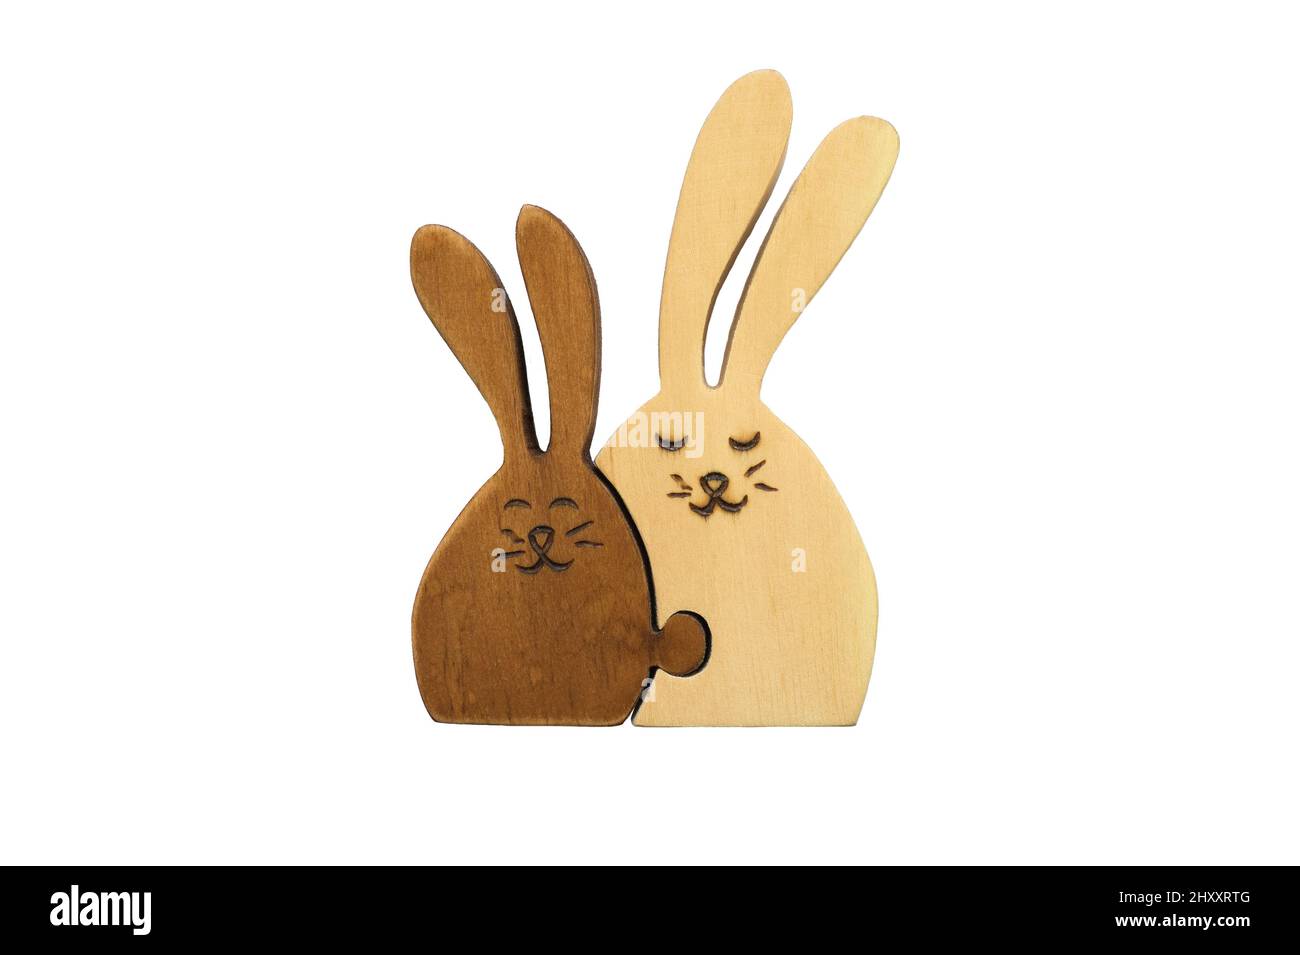 Wooden figures of two hares together isolated on white background. Concept of family and love, mother and child. Stock Photo